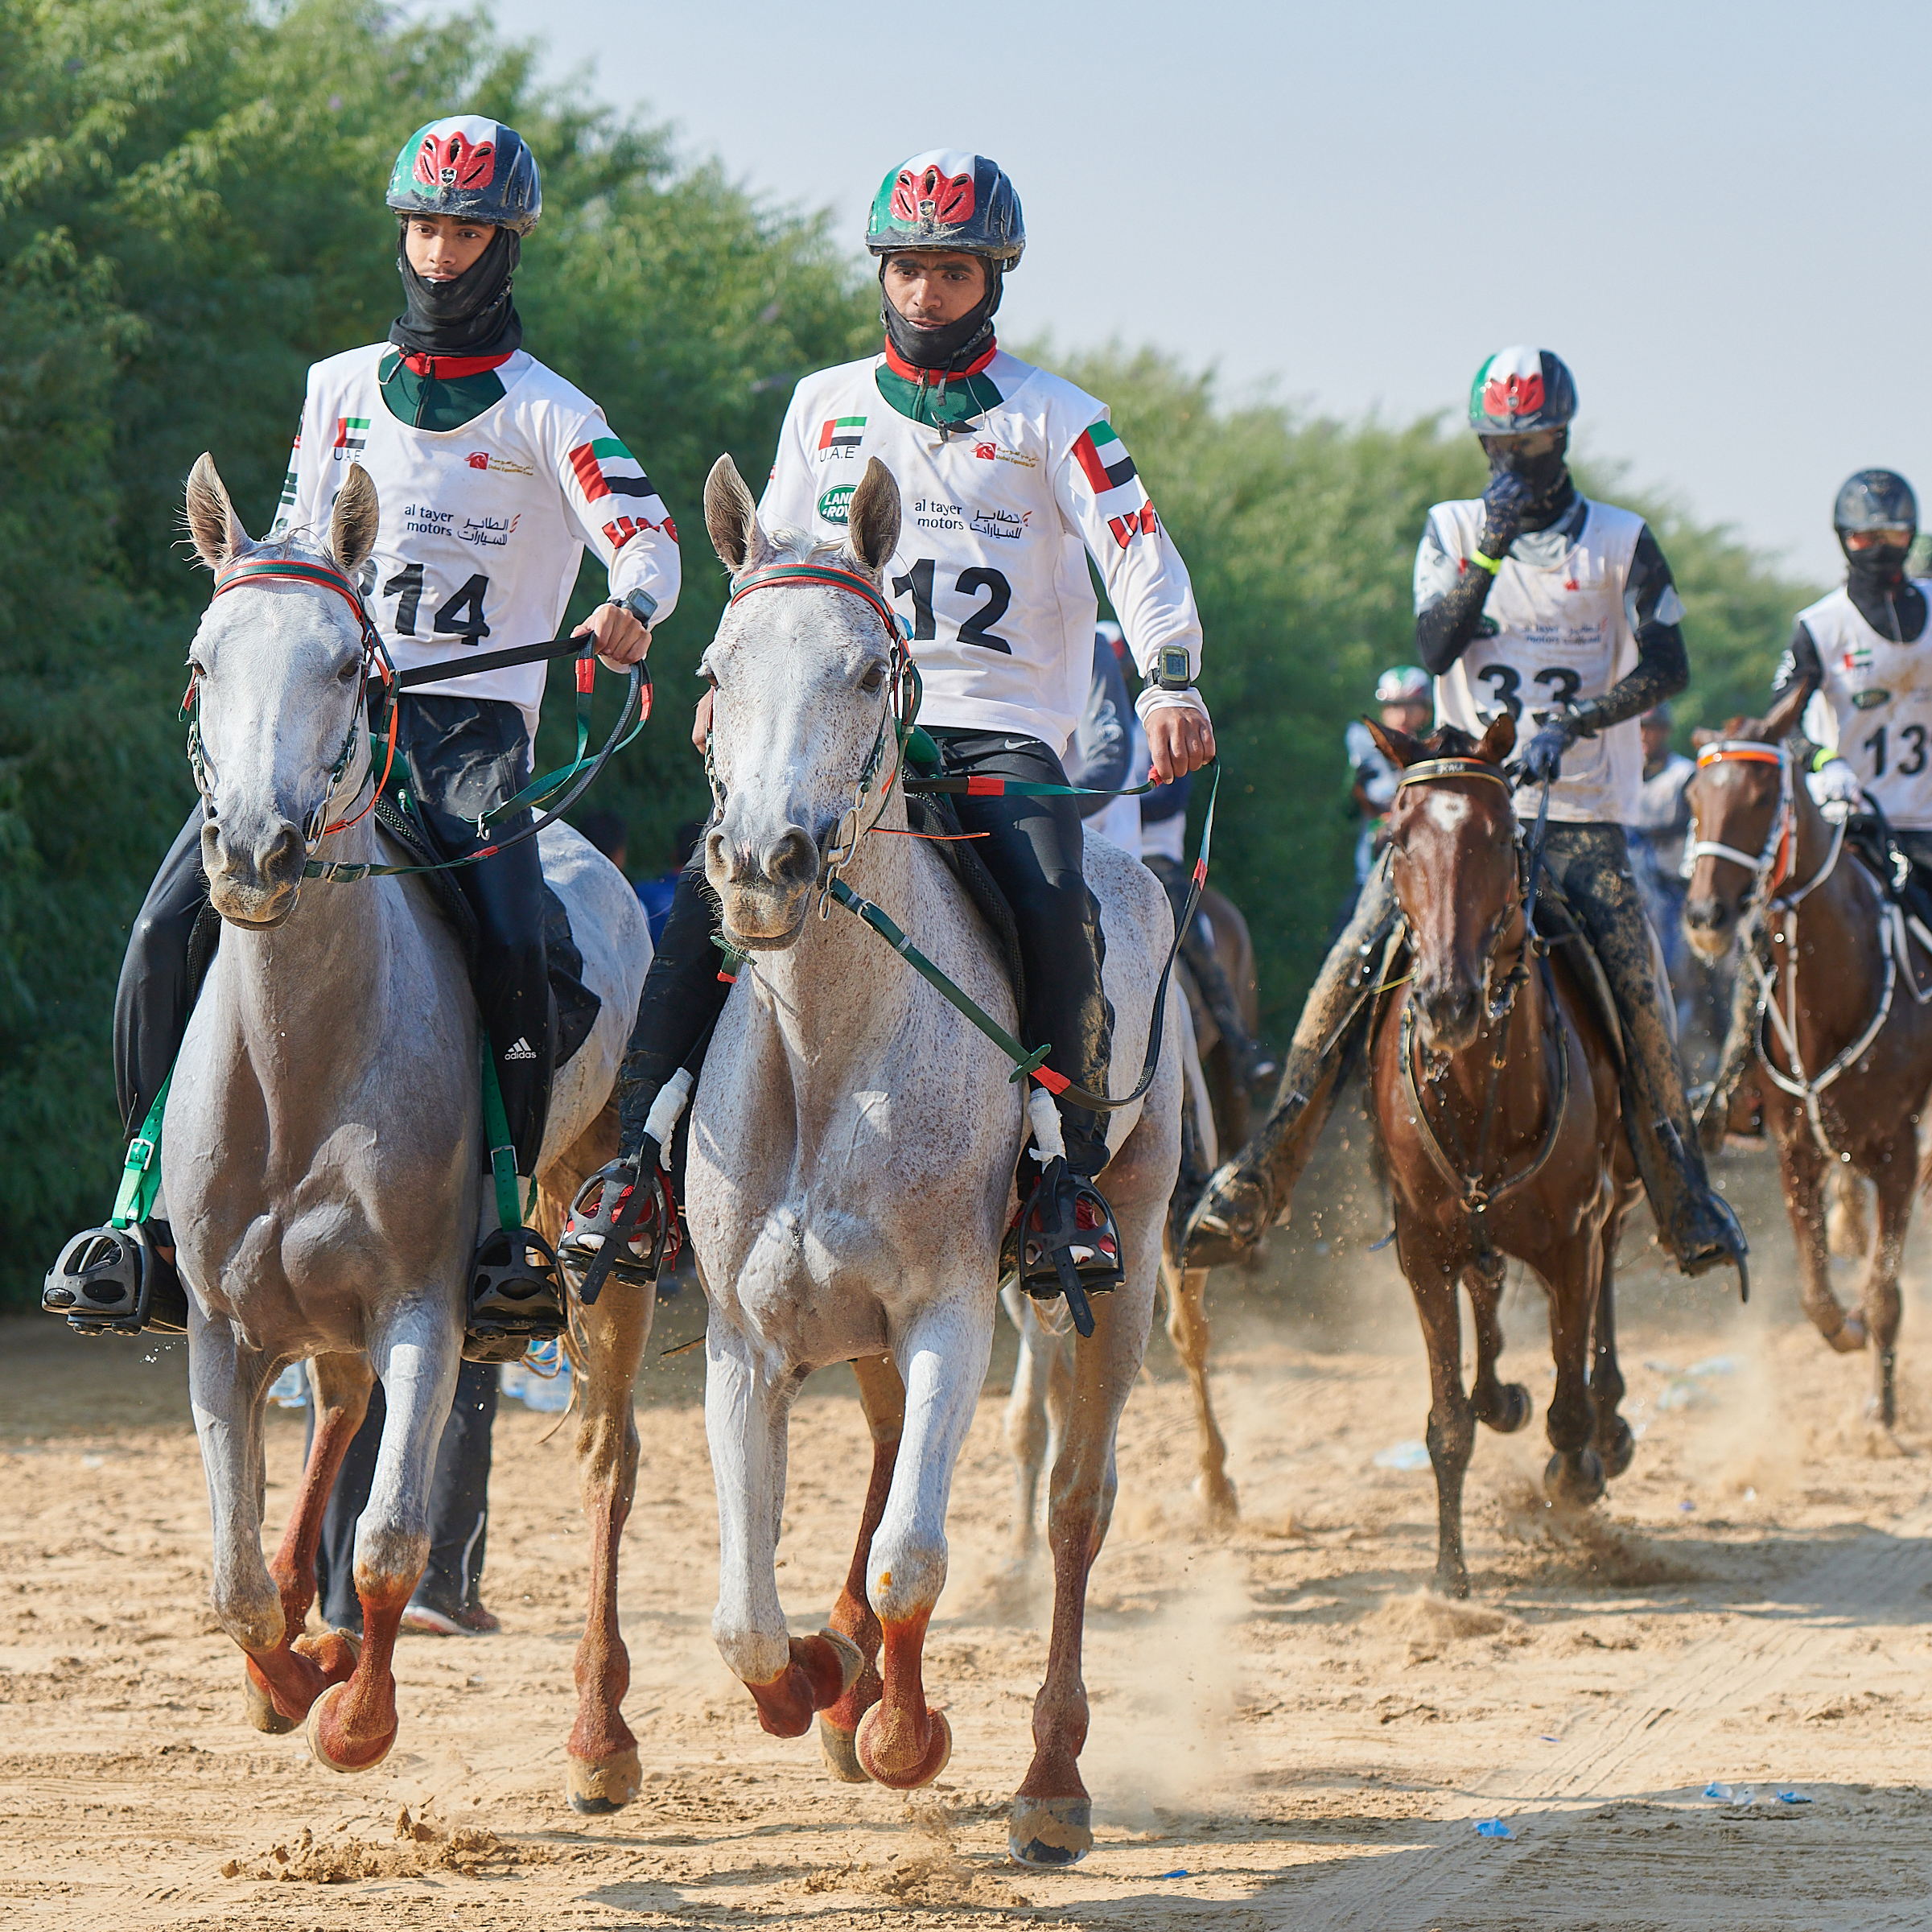 Gamilati Endurance Cup for Mares 2019